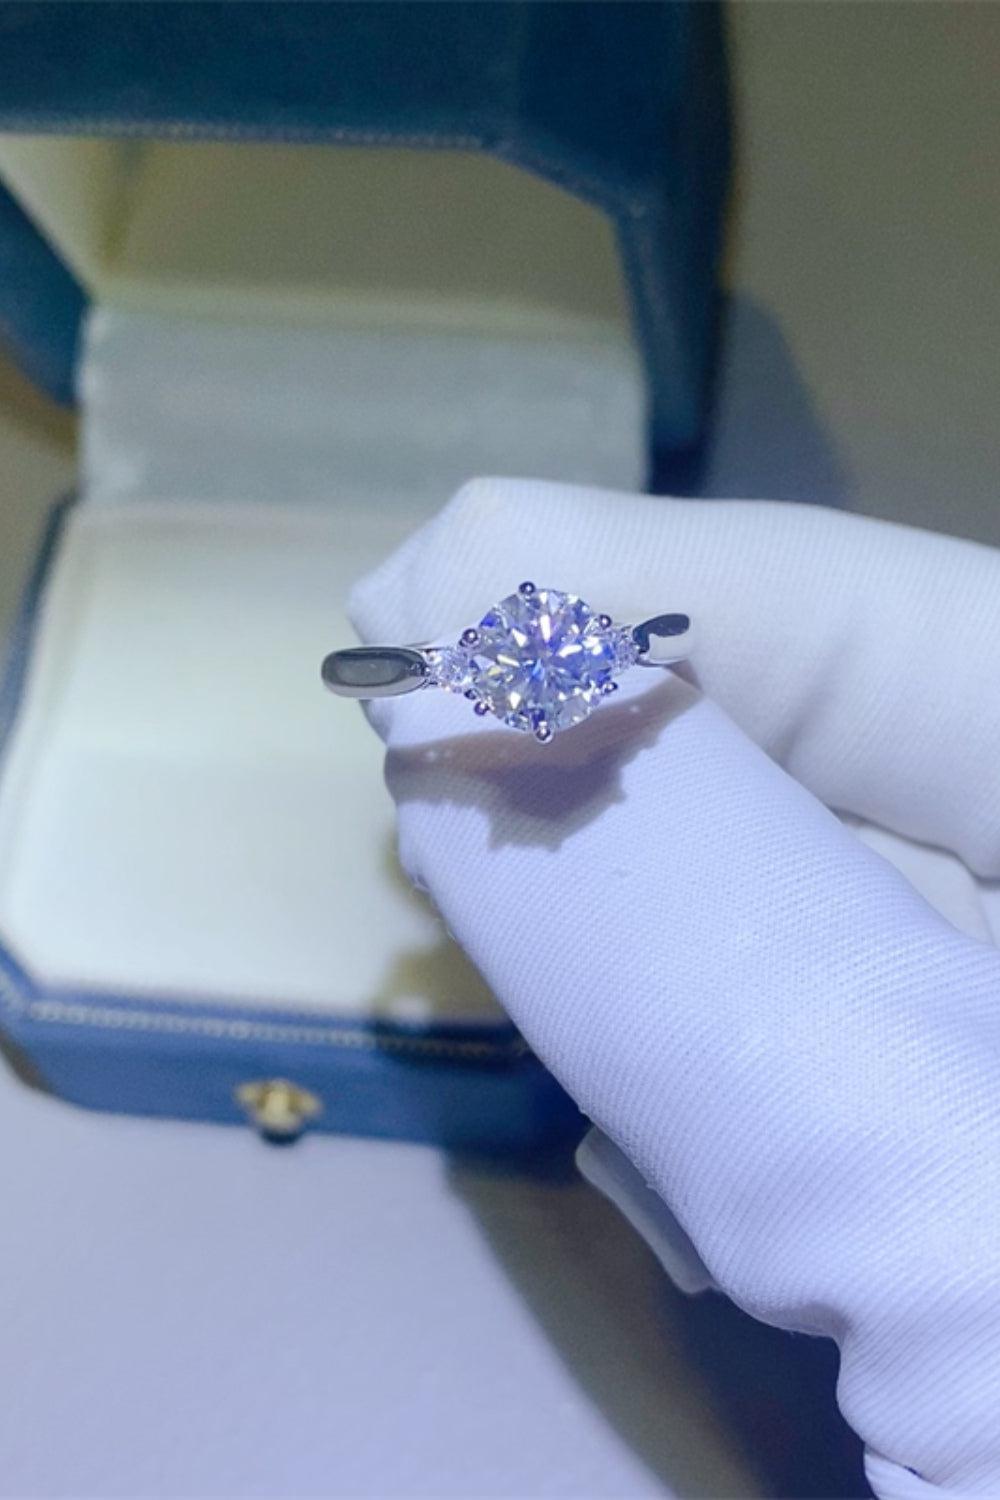 a woman's hand holding a ring with a diamond in it